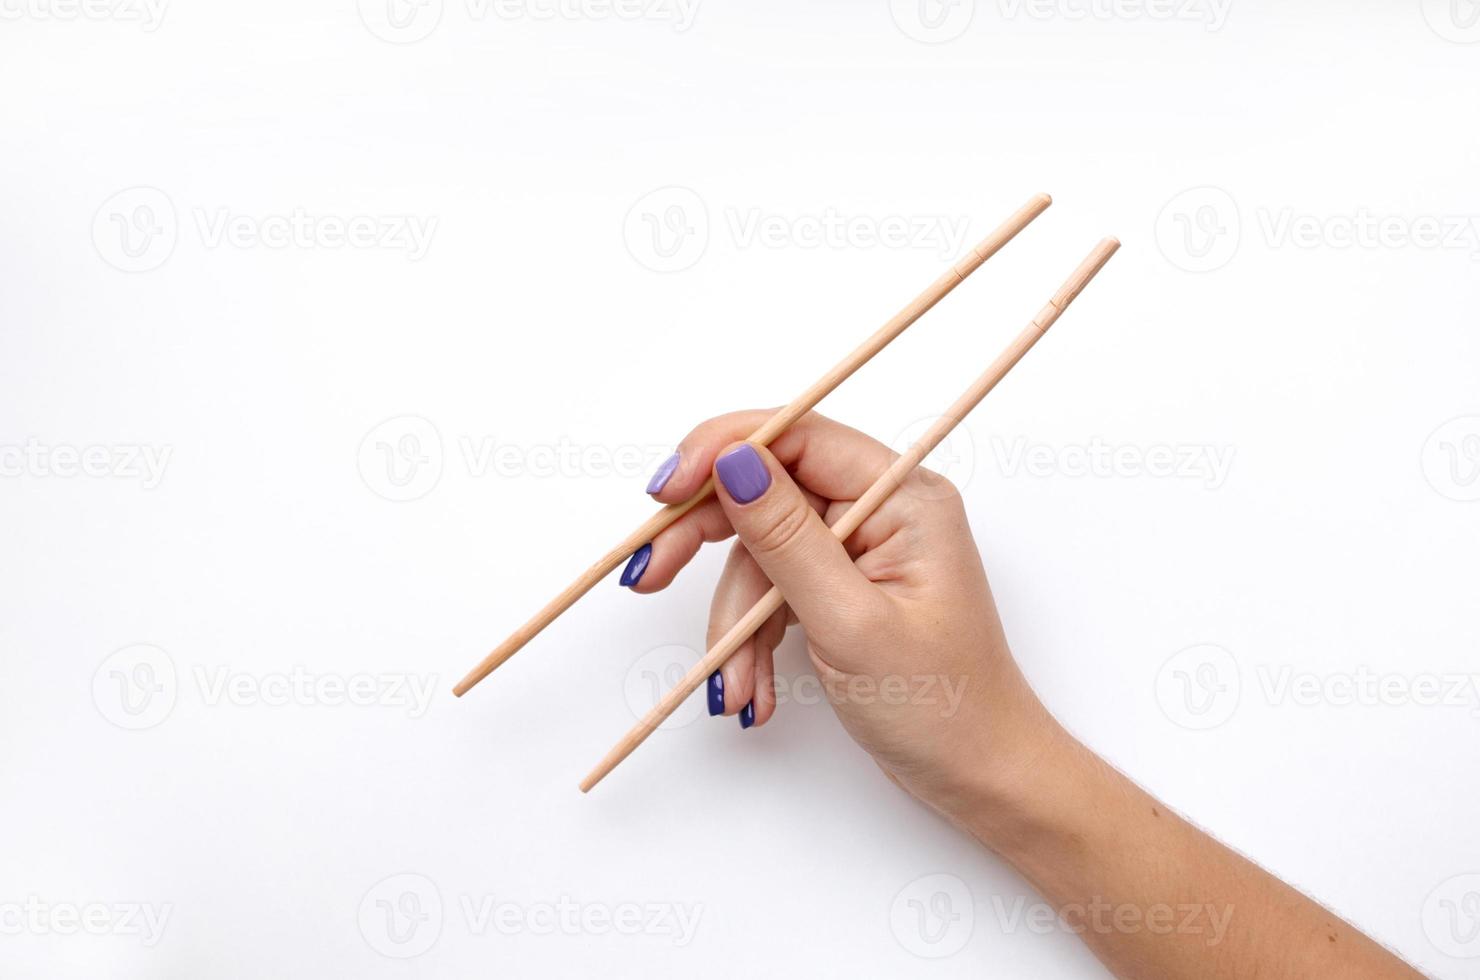 An example of how to hold sticks photo